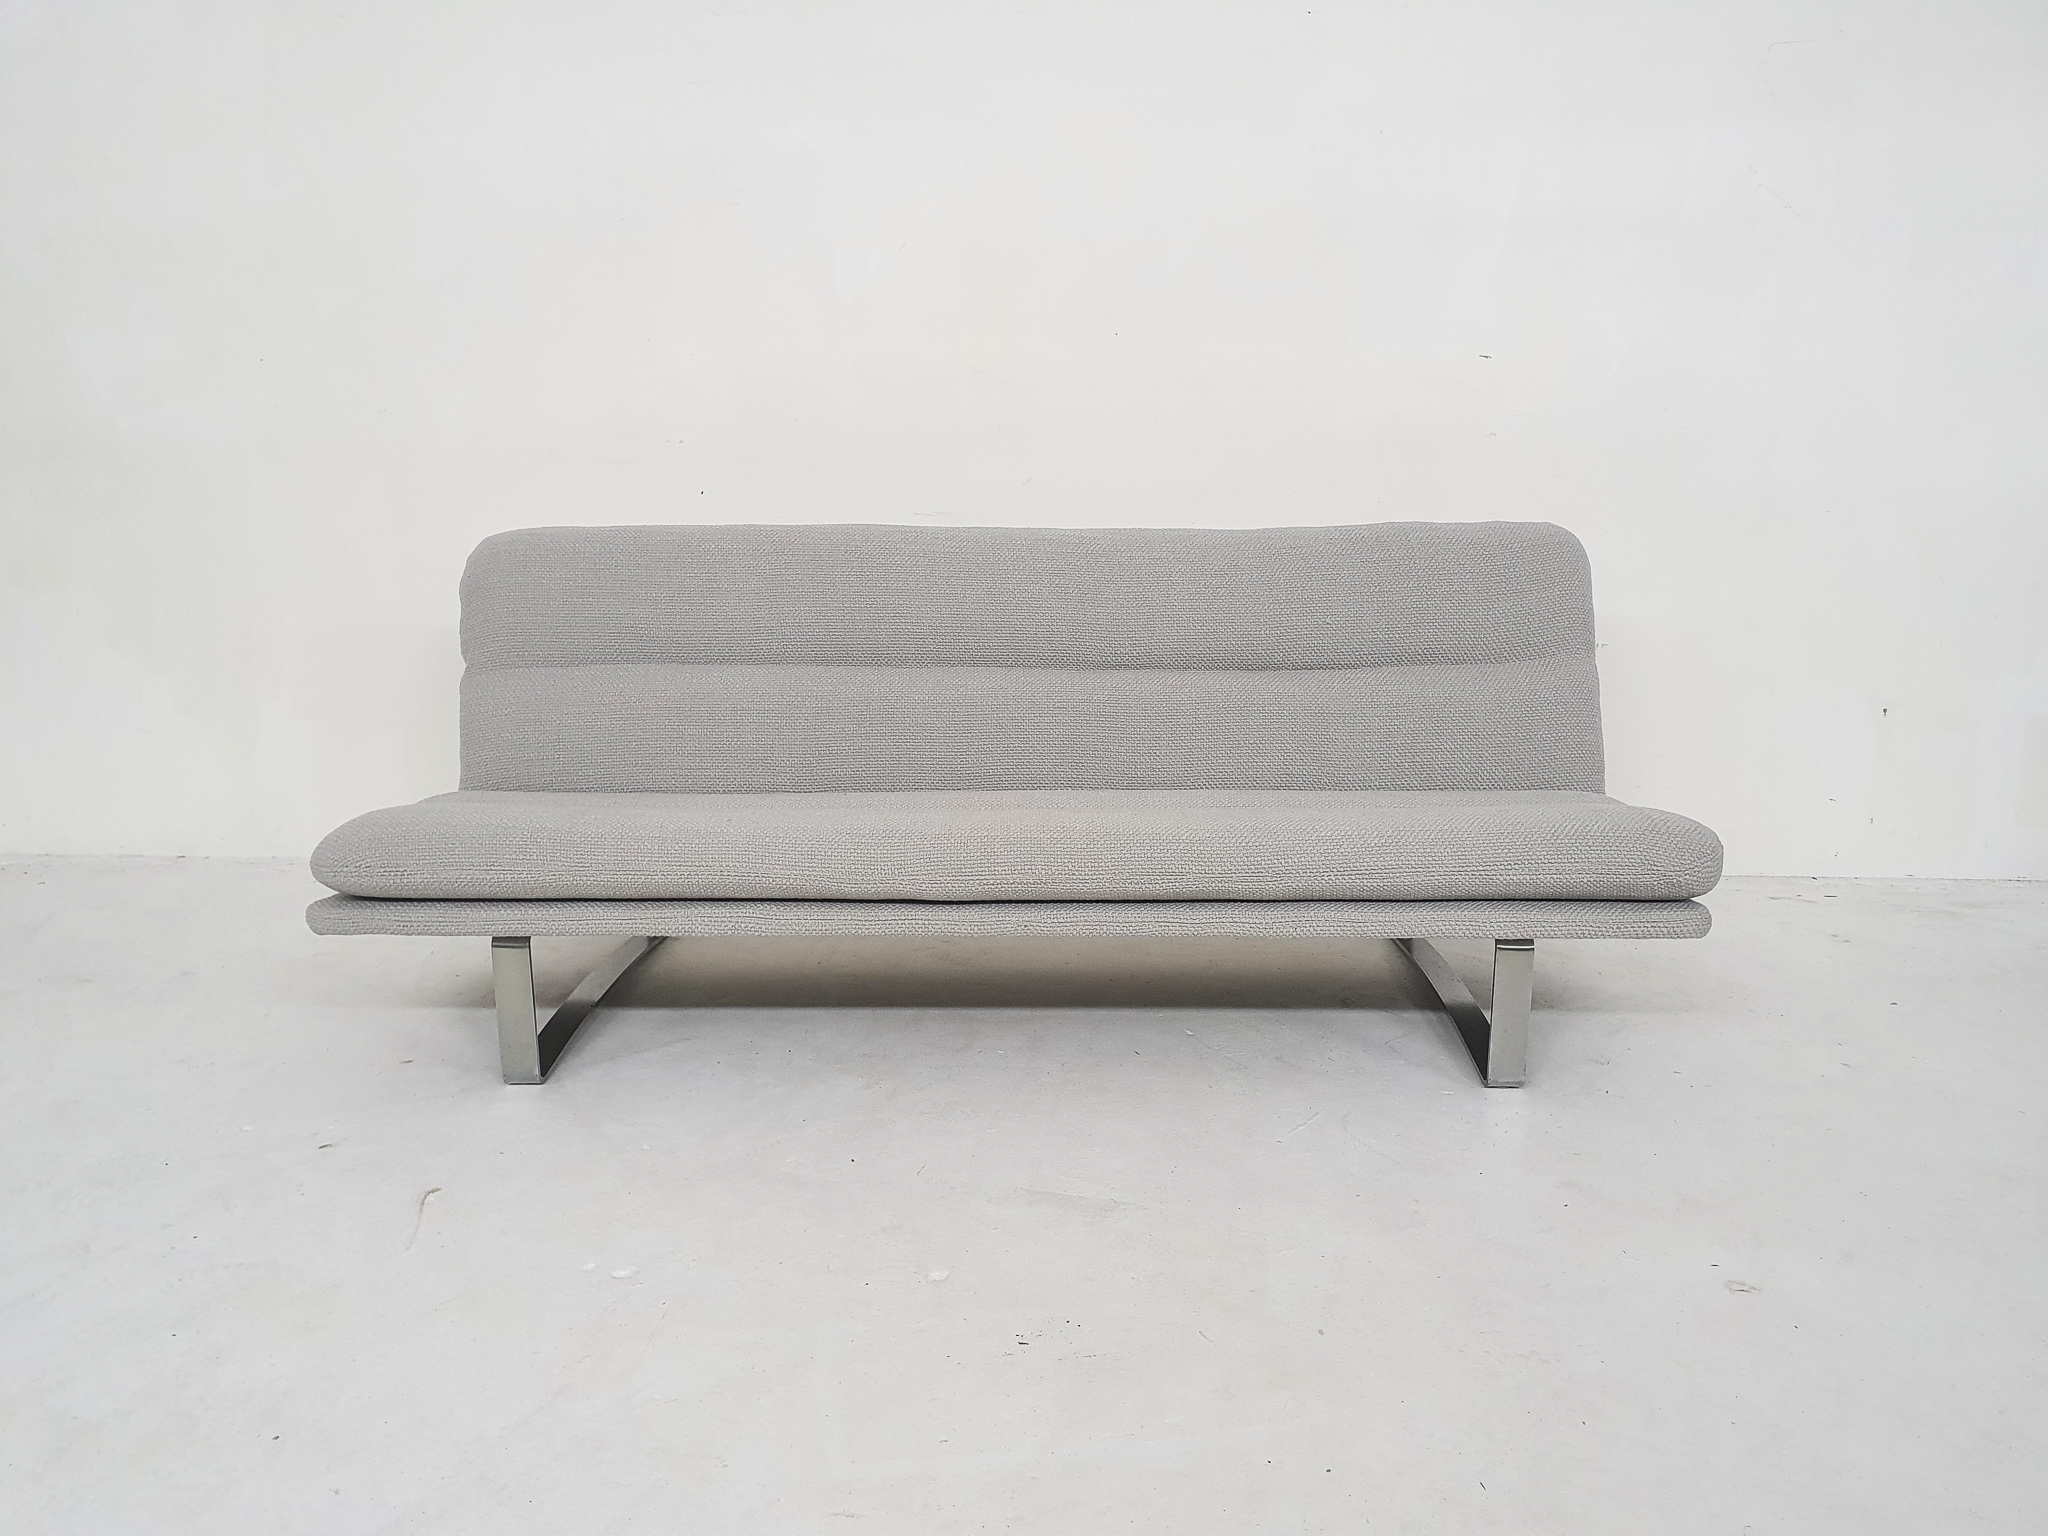 Vintage at Goed | Als Buy Seating Oud Zo Sofas Design